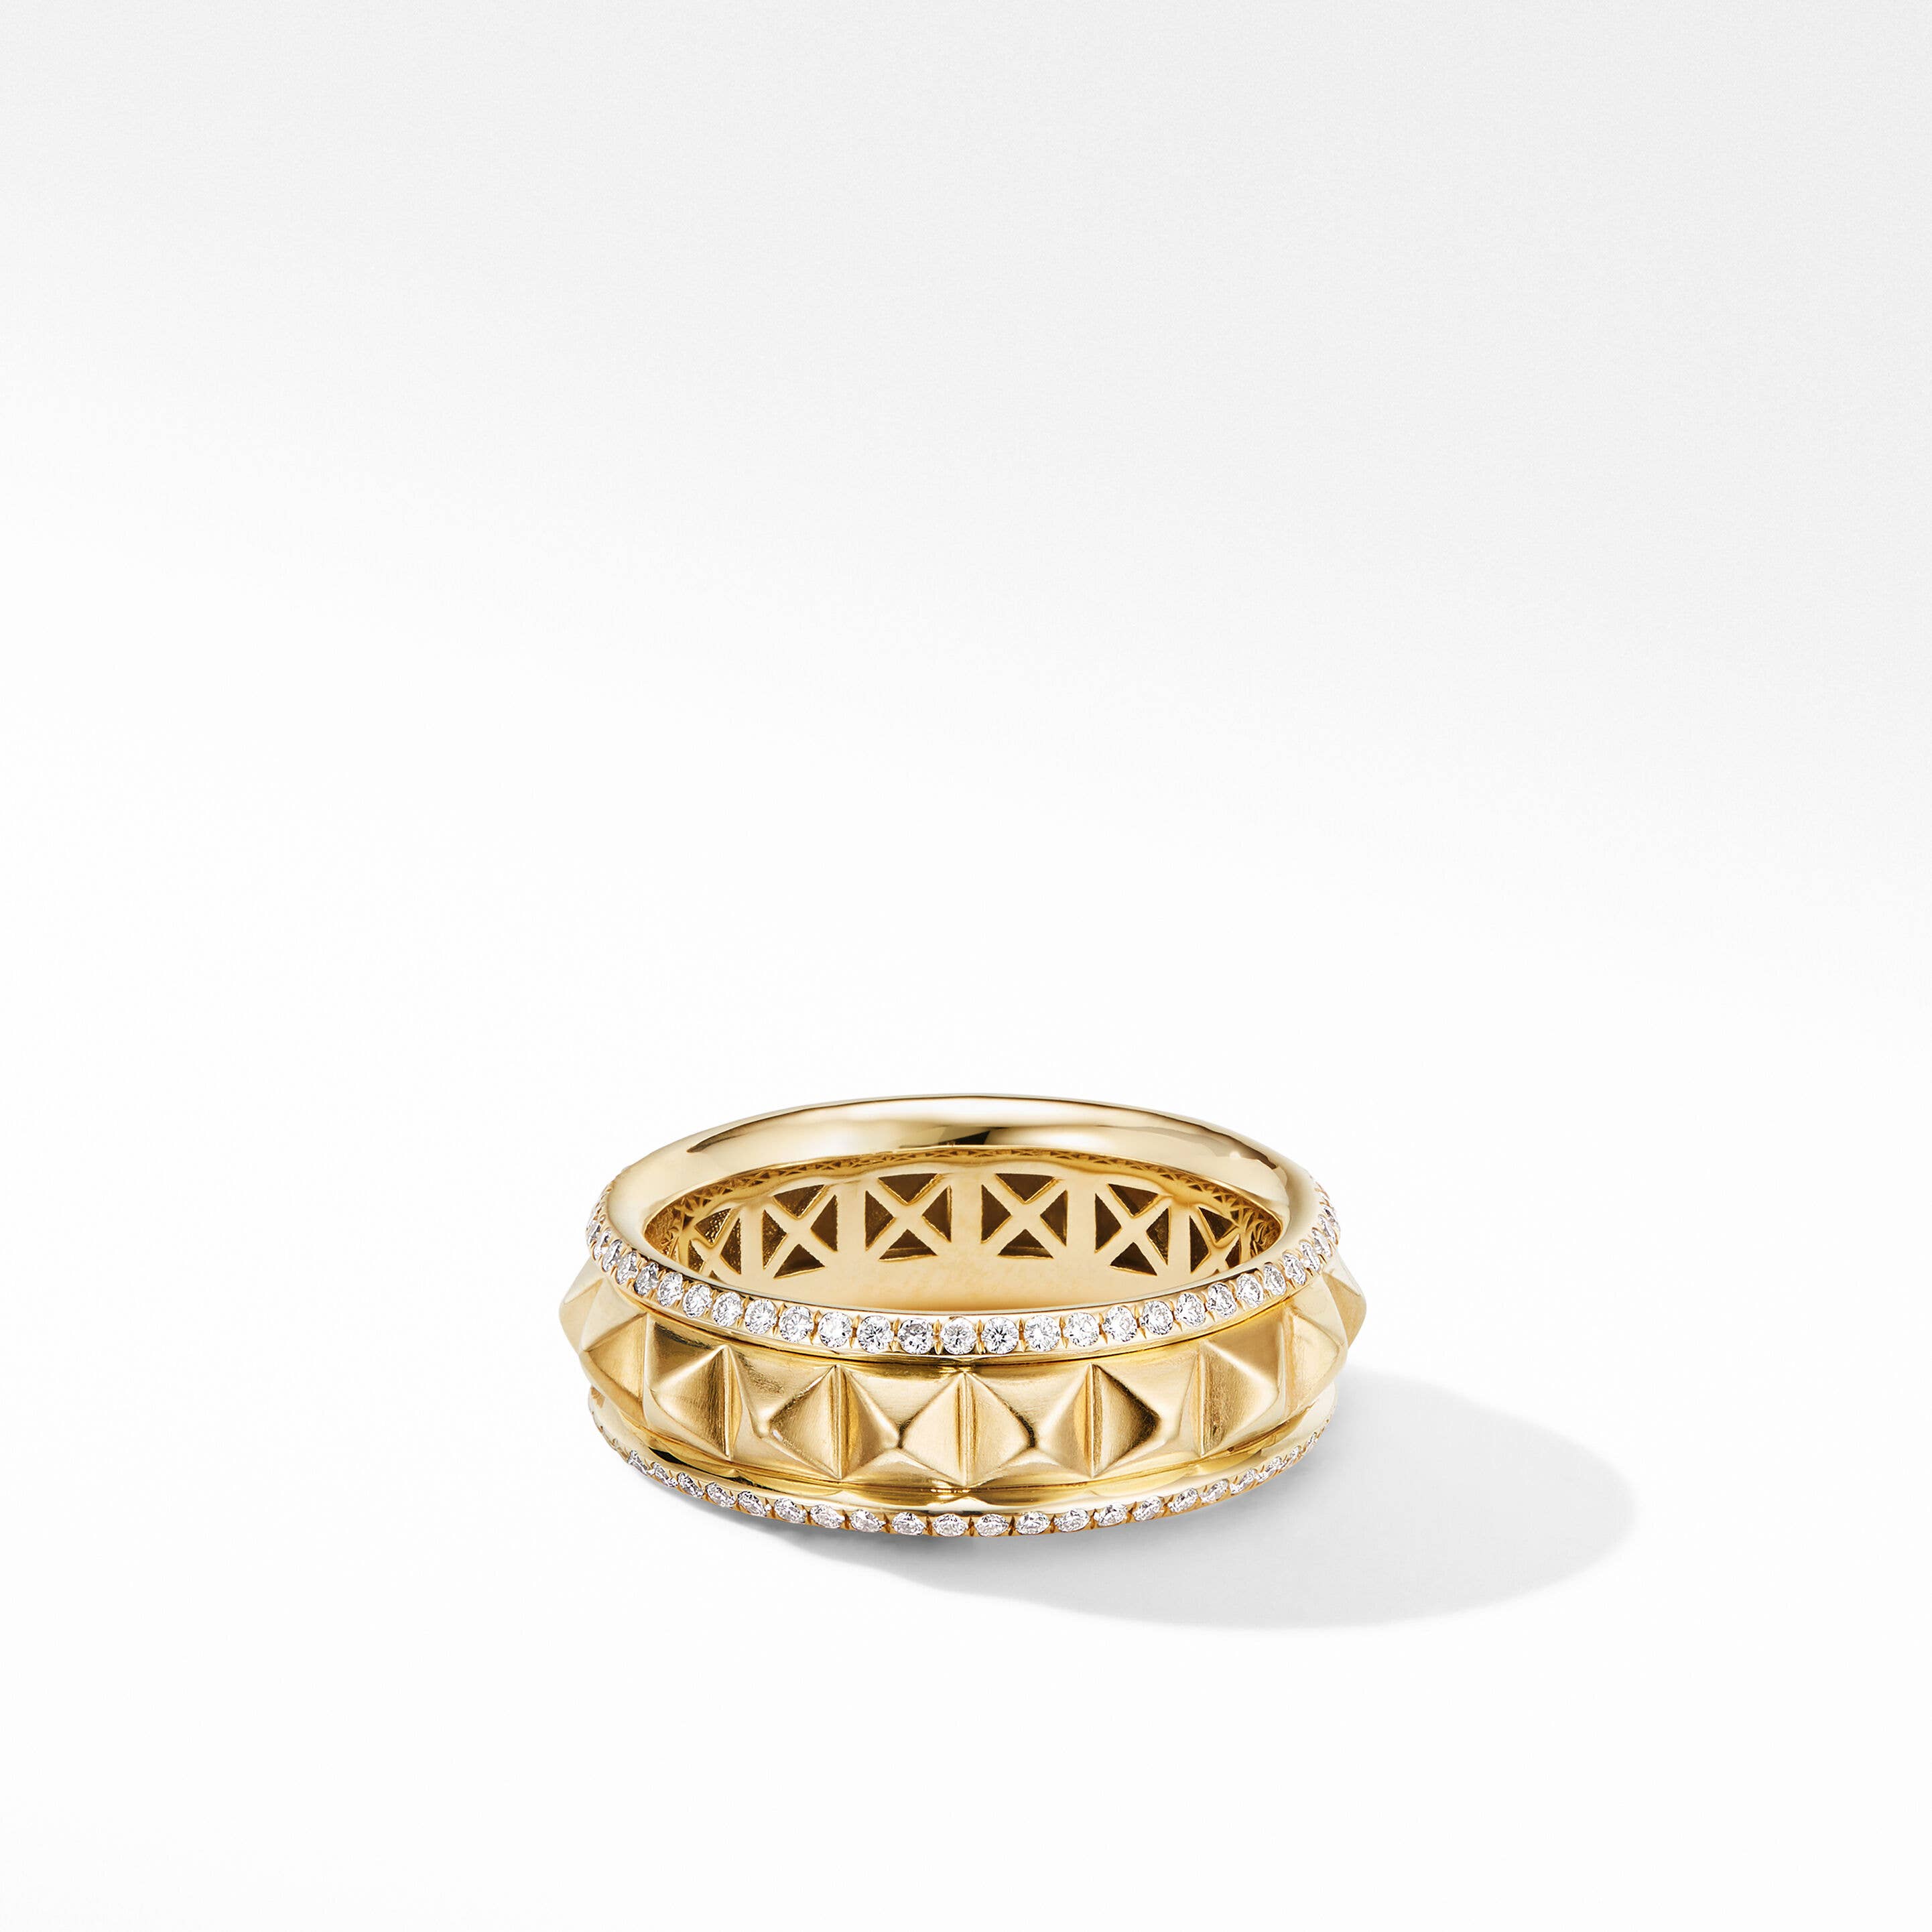 Modern Renaissance Pyramid Band Ring in 18K Yellow Gold with Pavé Diamonds